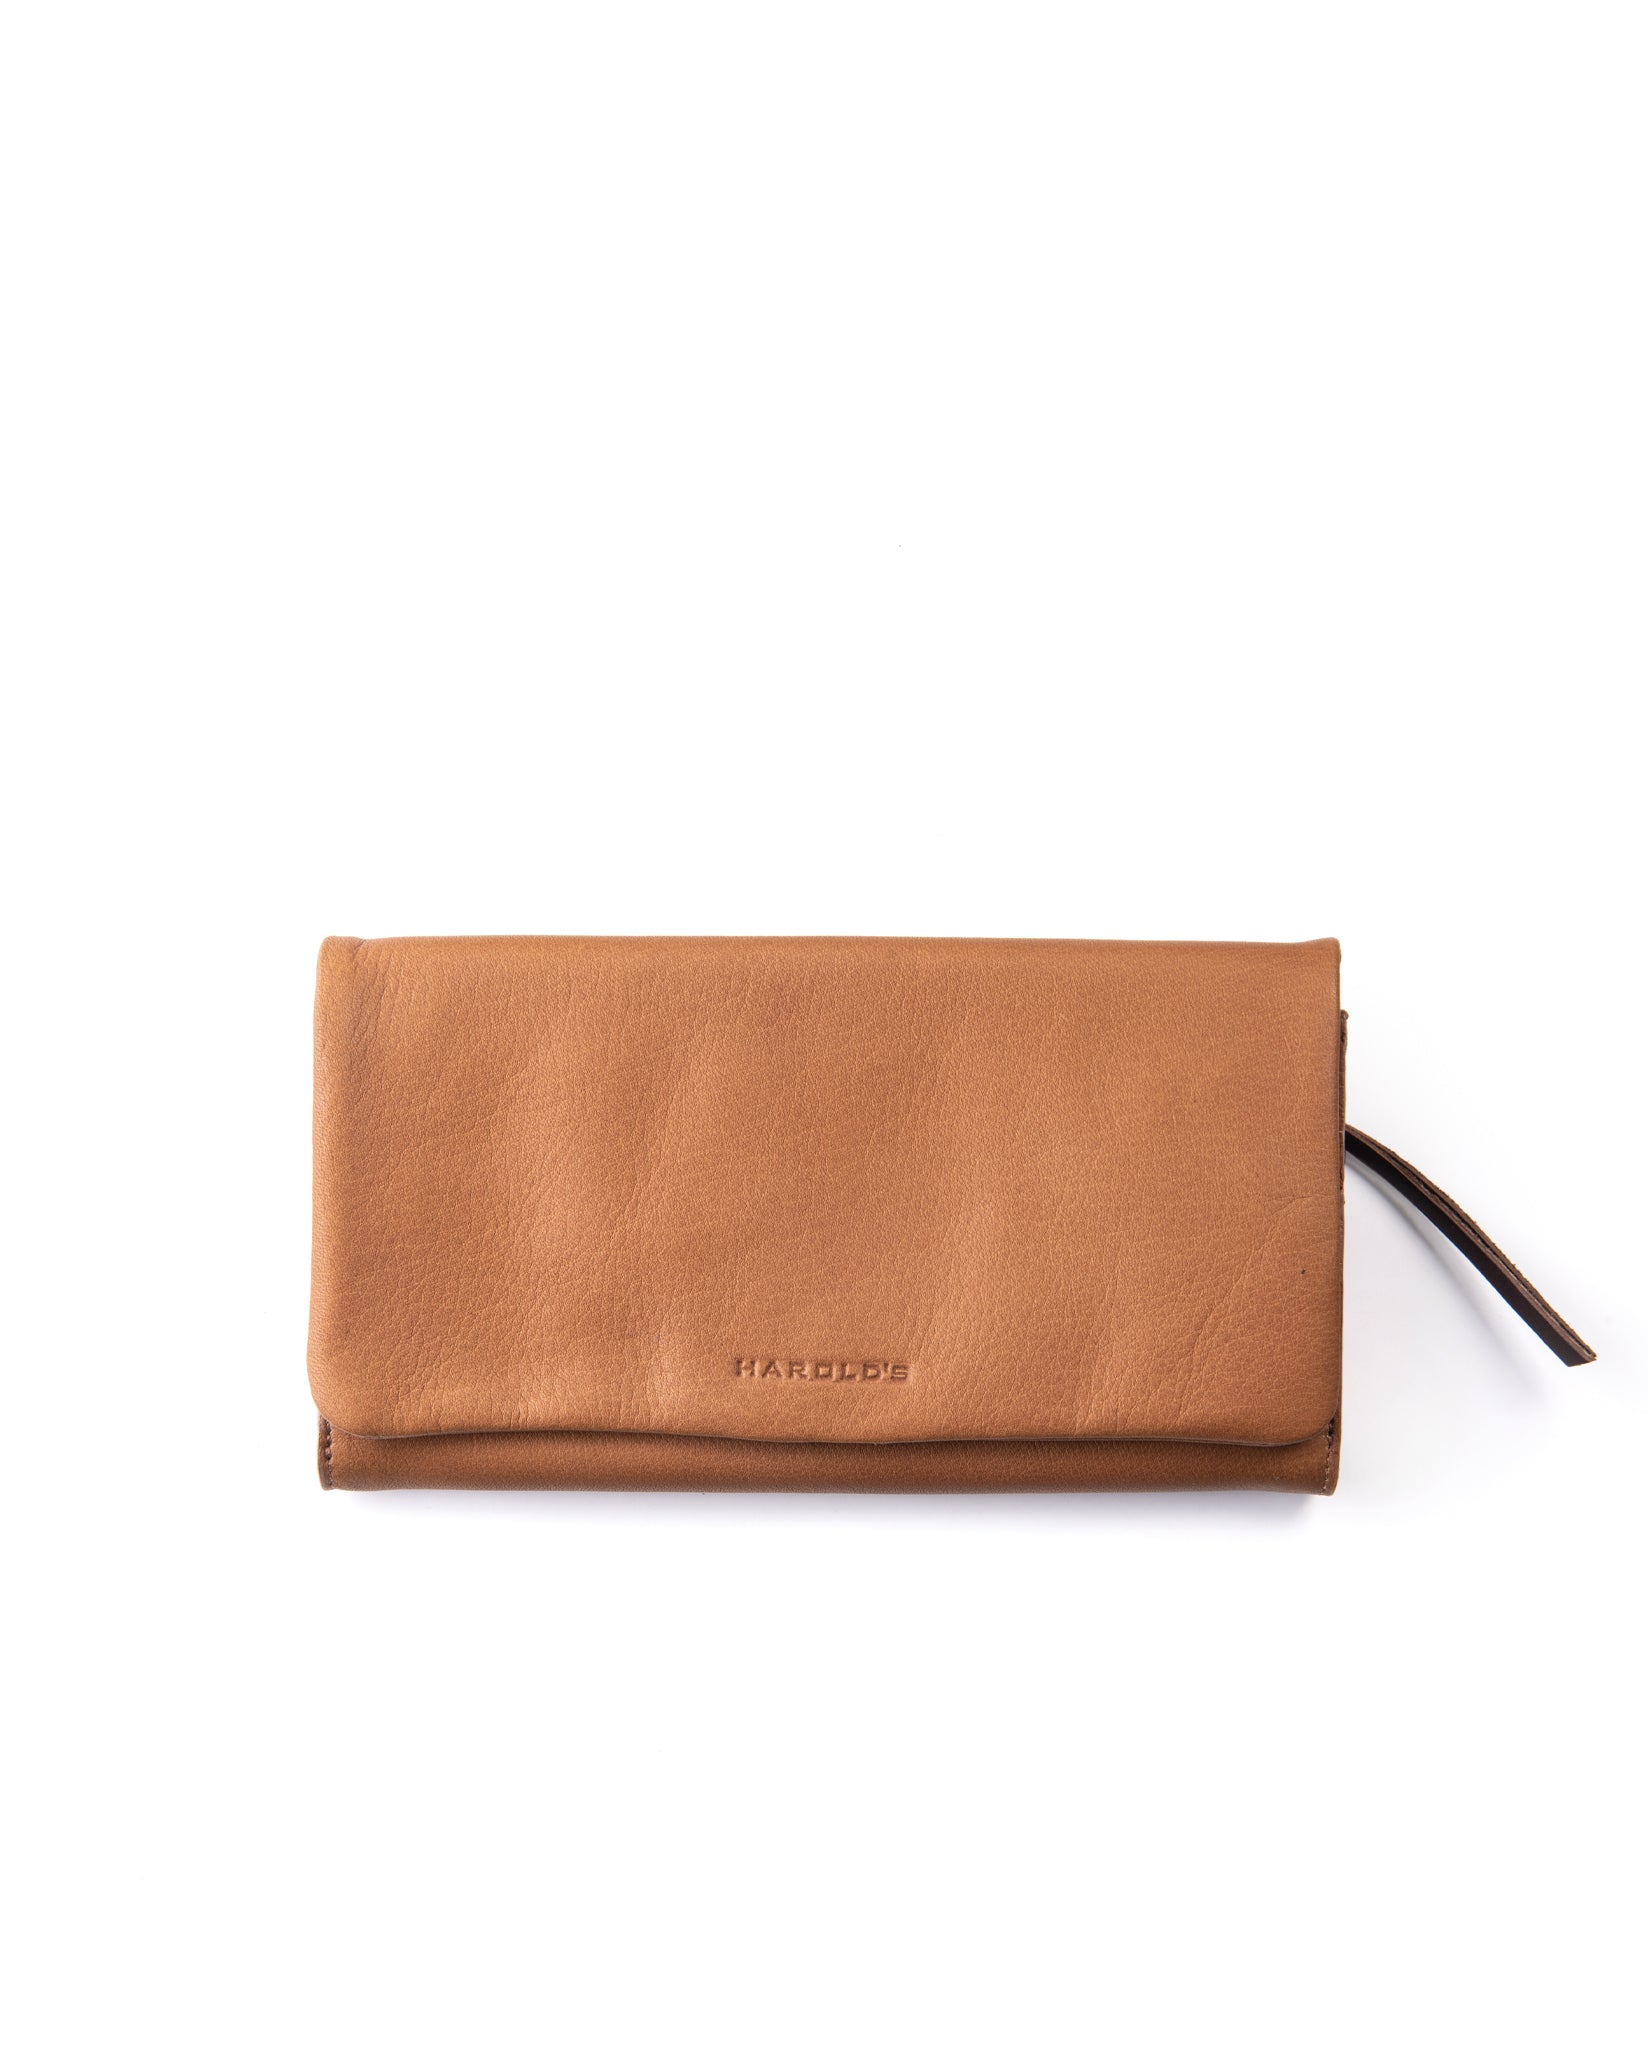 Chacoral Soft wallet flap large